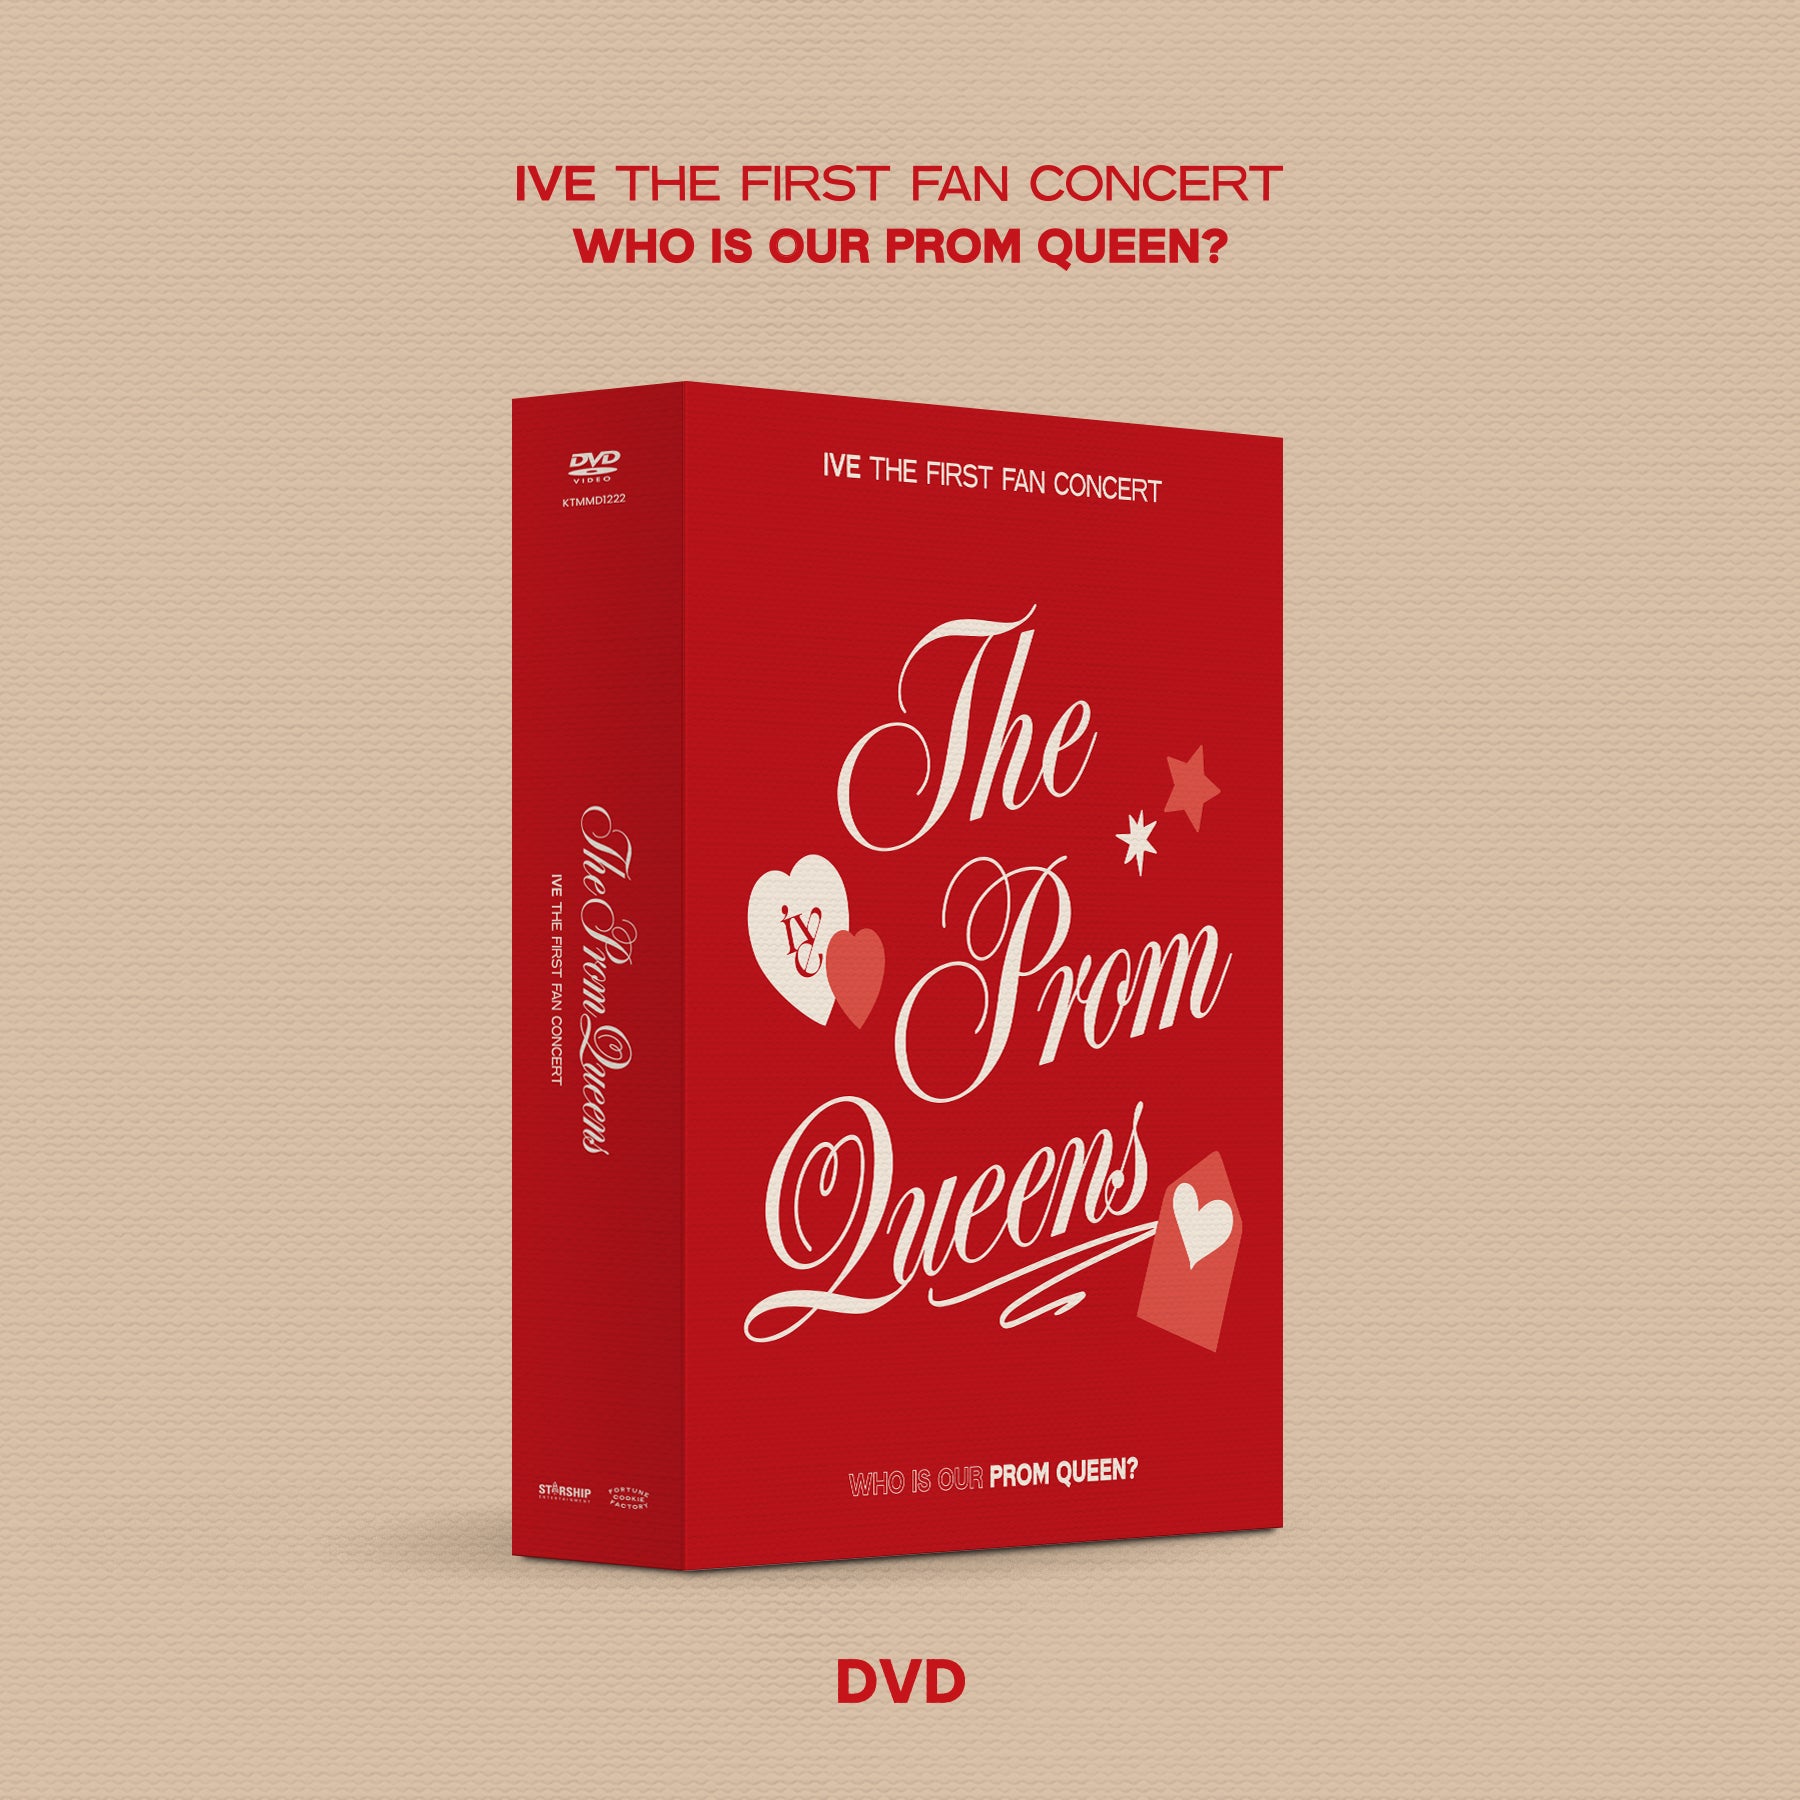 IVE - THE FIRST FAN CONCERT The Prom Queens DVD